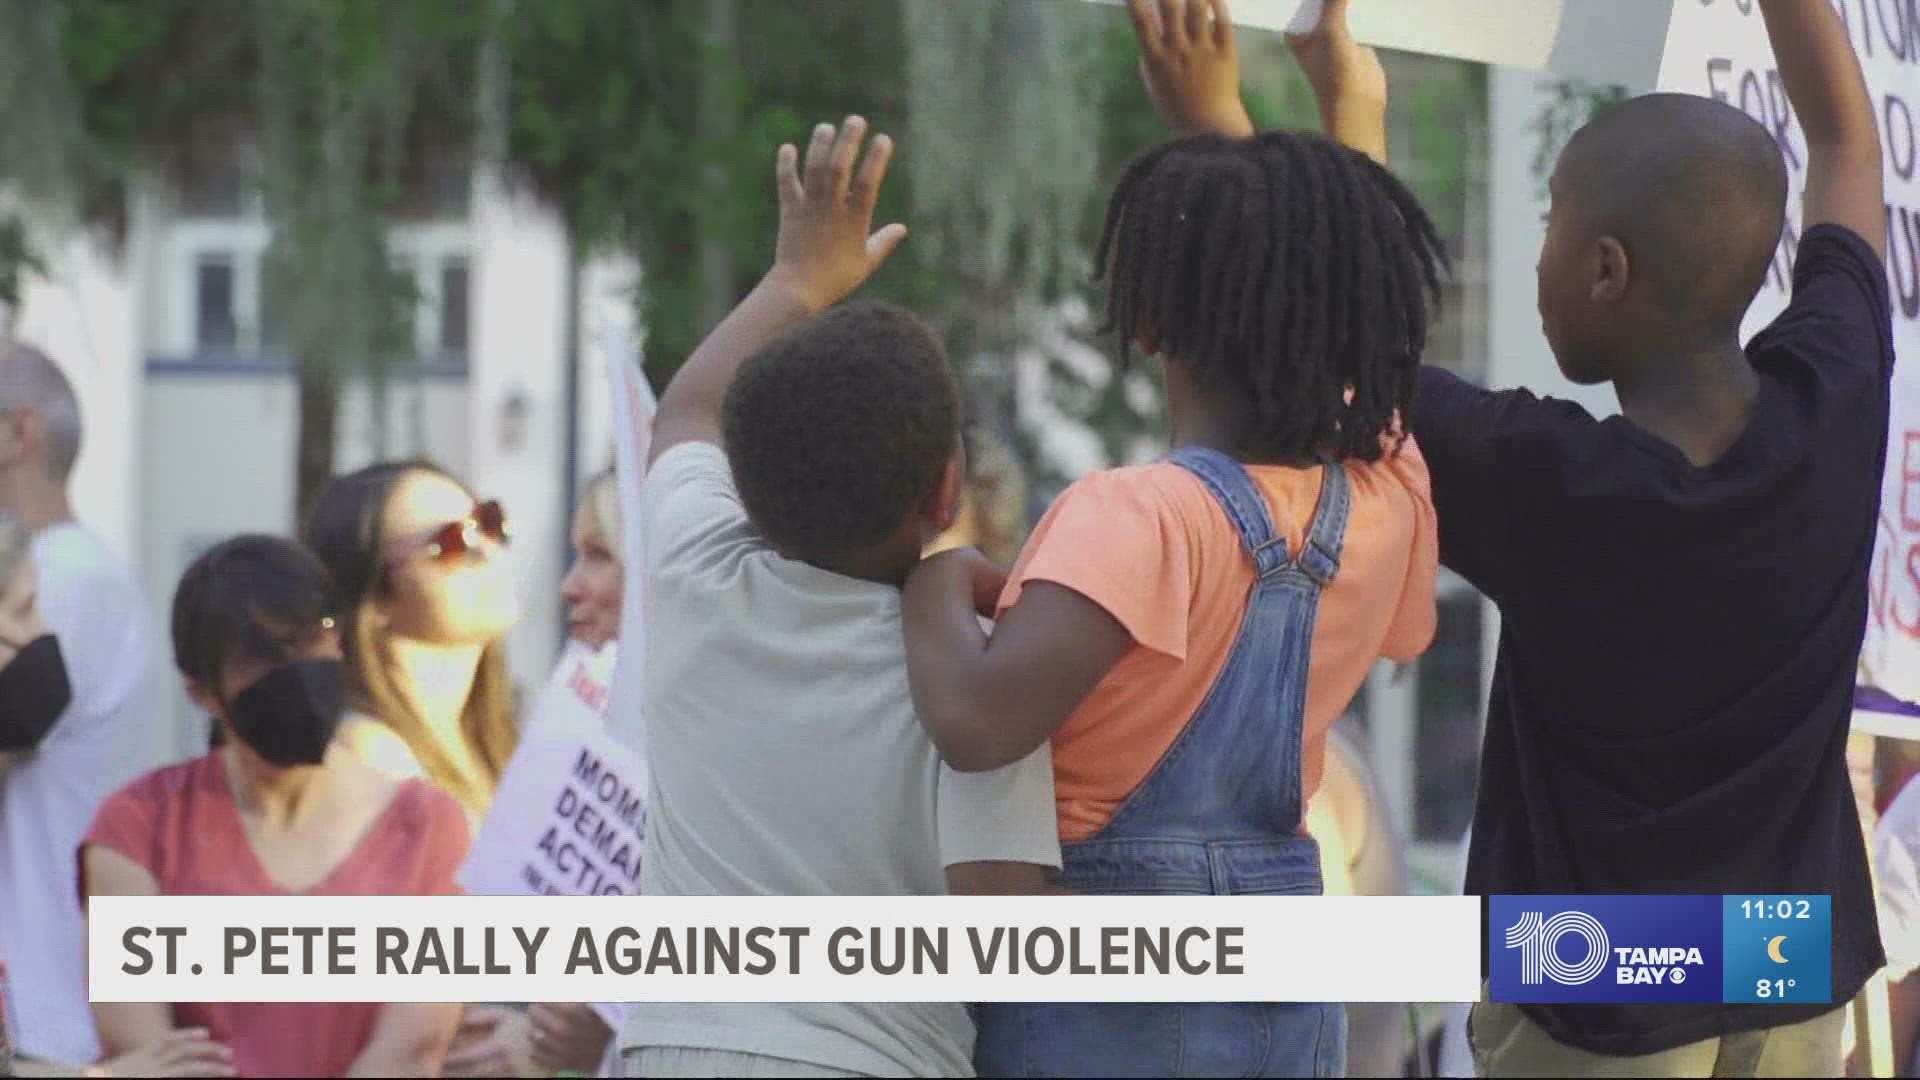 Moms Demand Action in Pinellas County, along with community leaders, held the event at Williams Park.